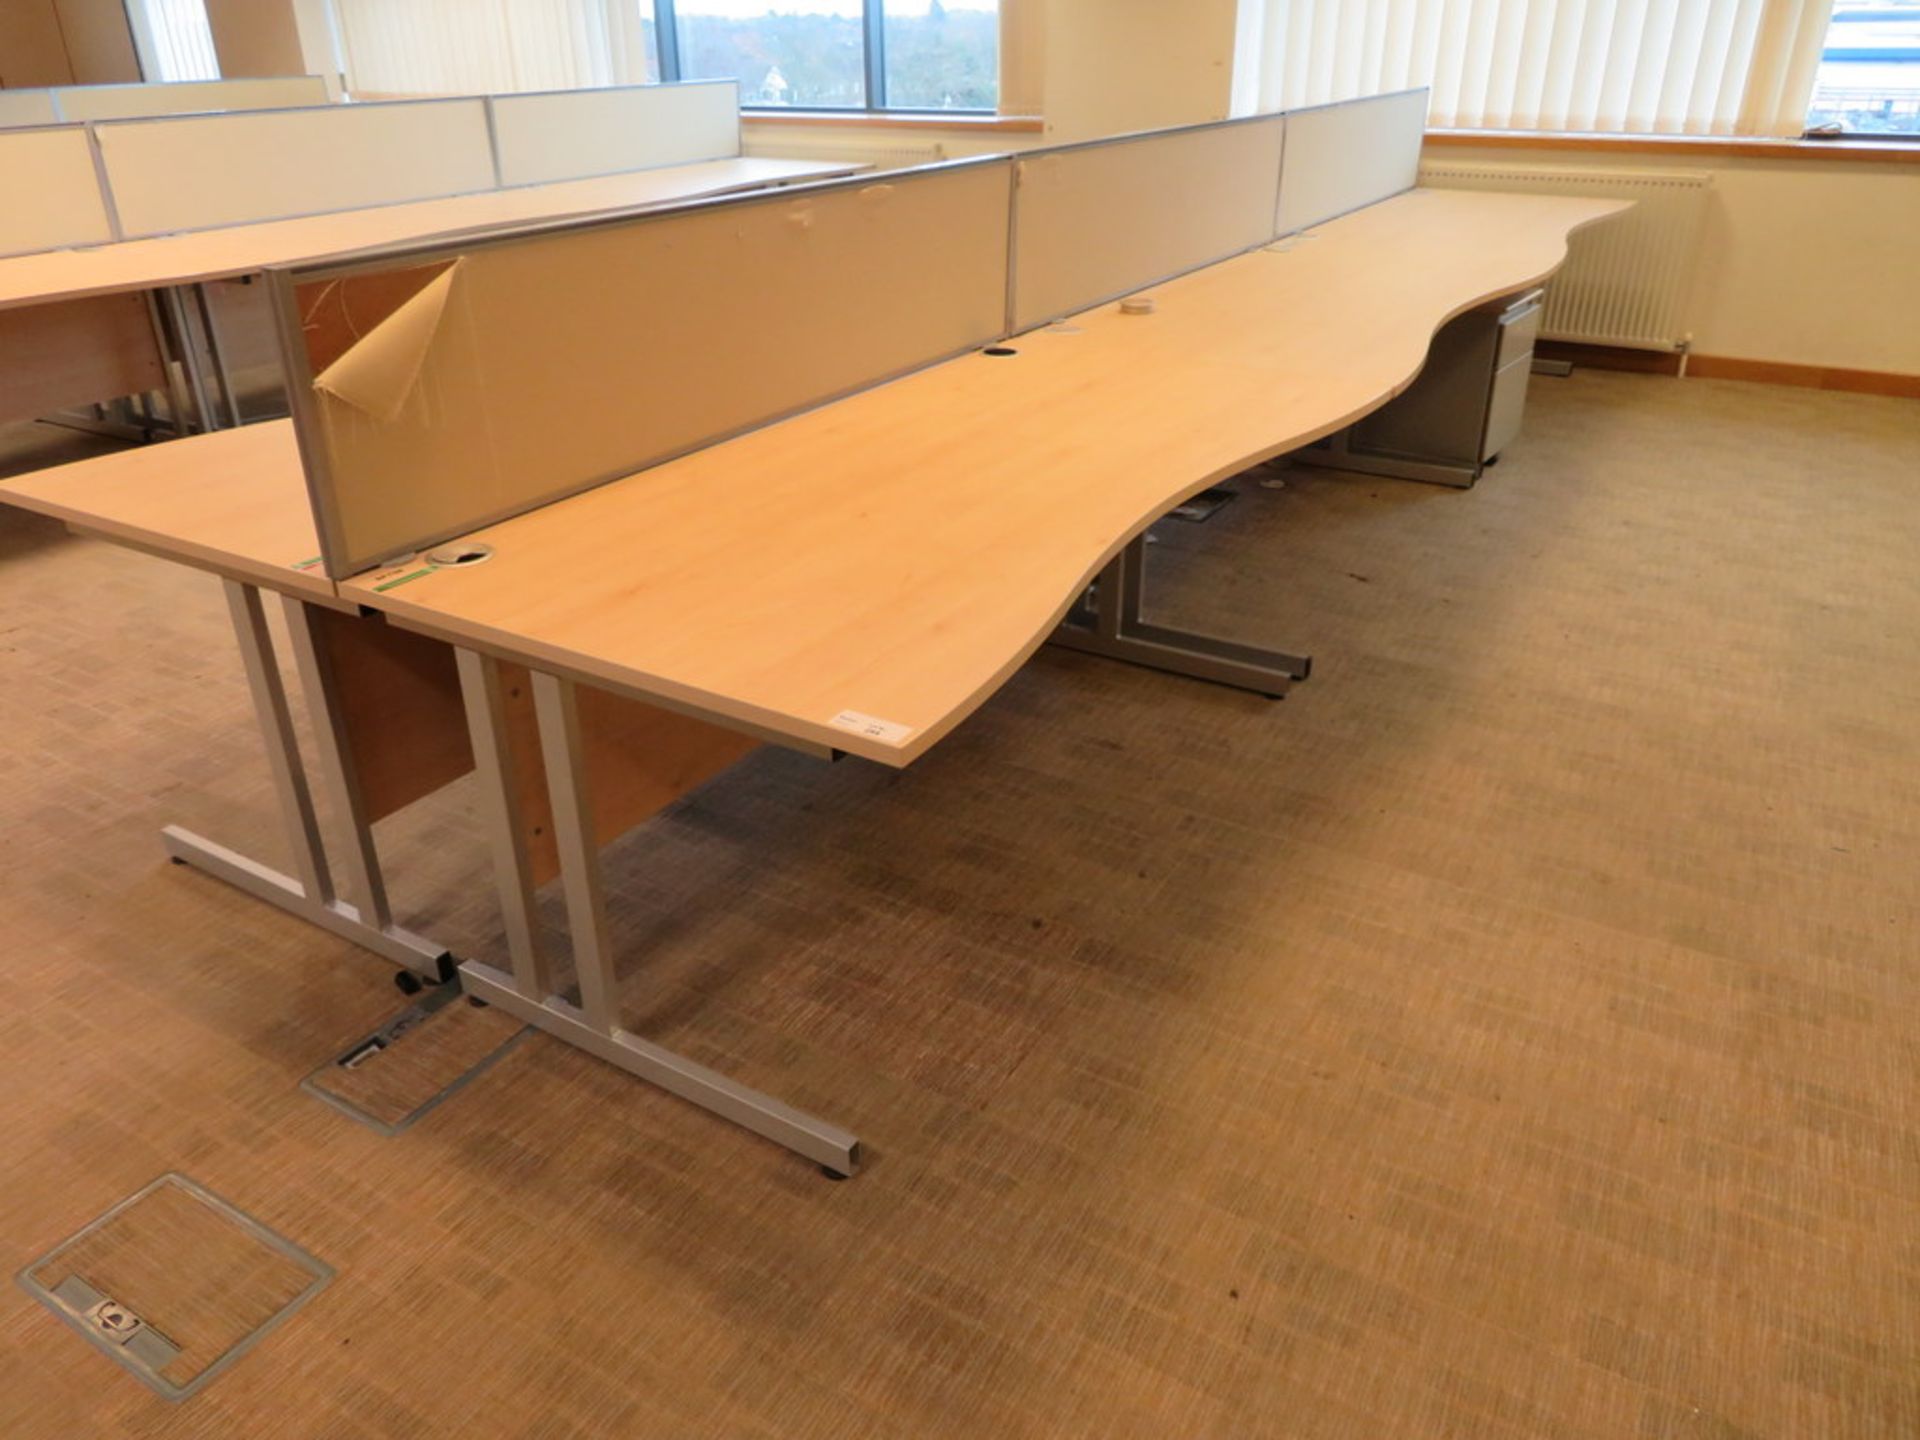 6 X LIGHTWOOD EFFECT CURVED FRONT OFFICE DESKS AND 3 X DESK DIVIDERS - Image 3 of 3